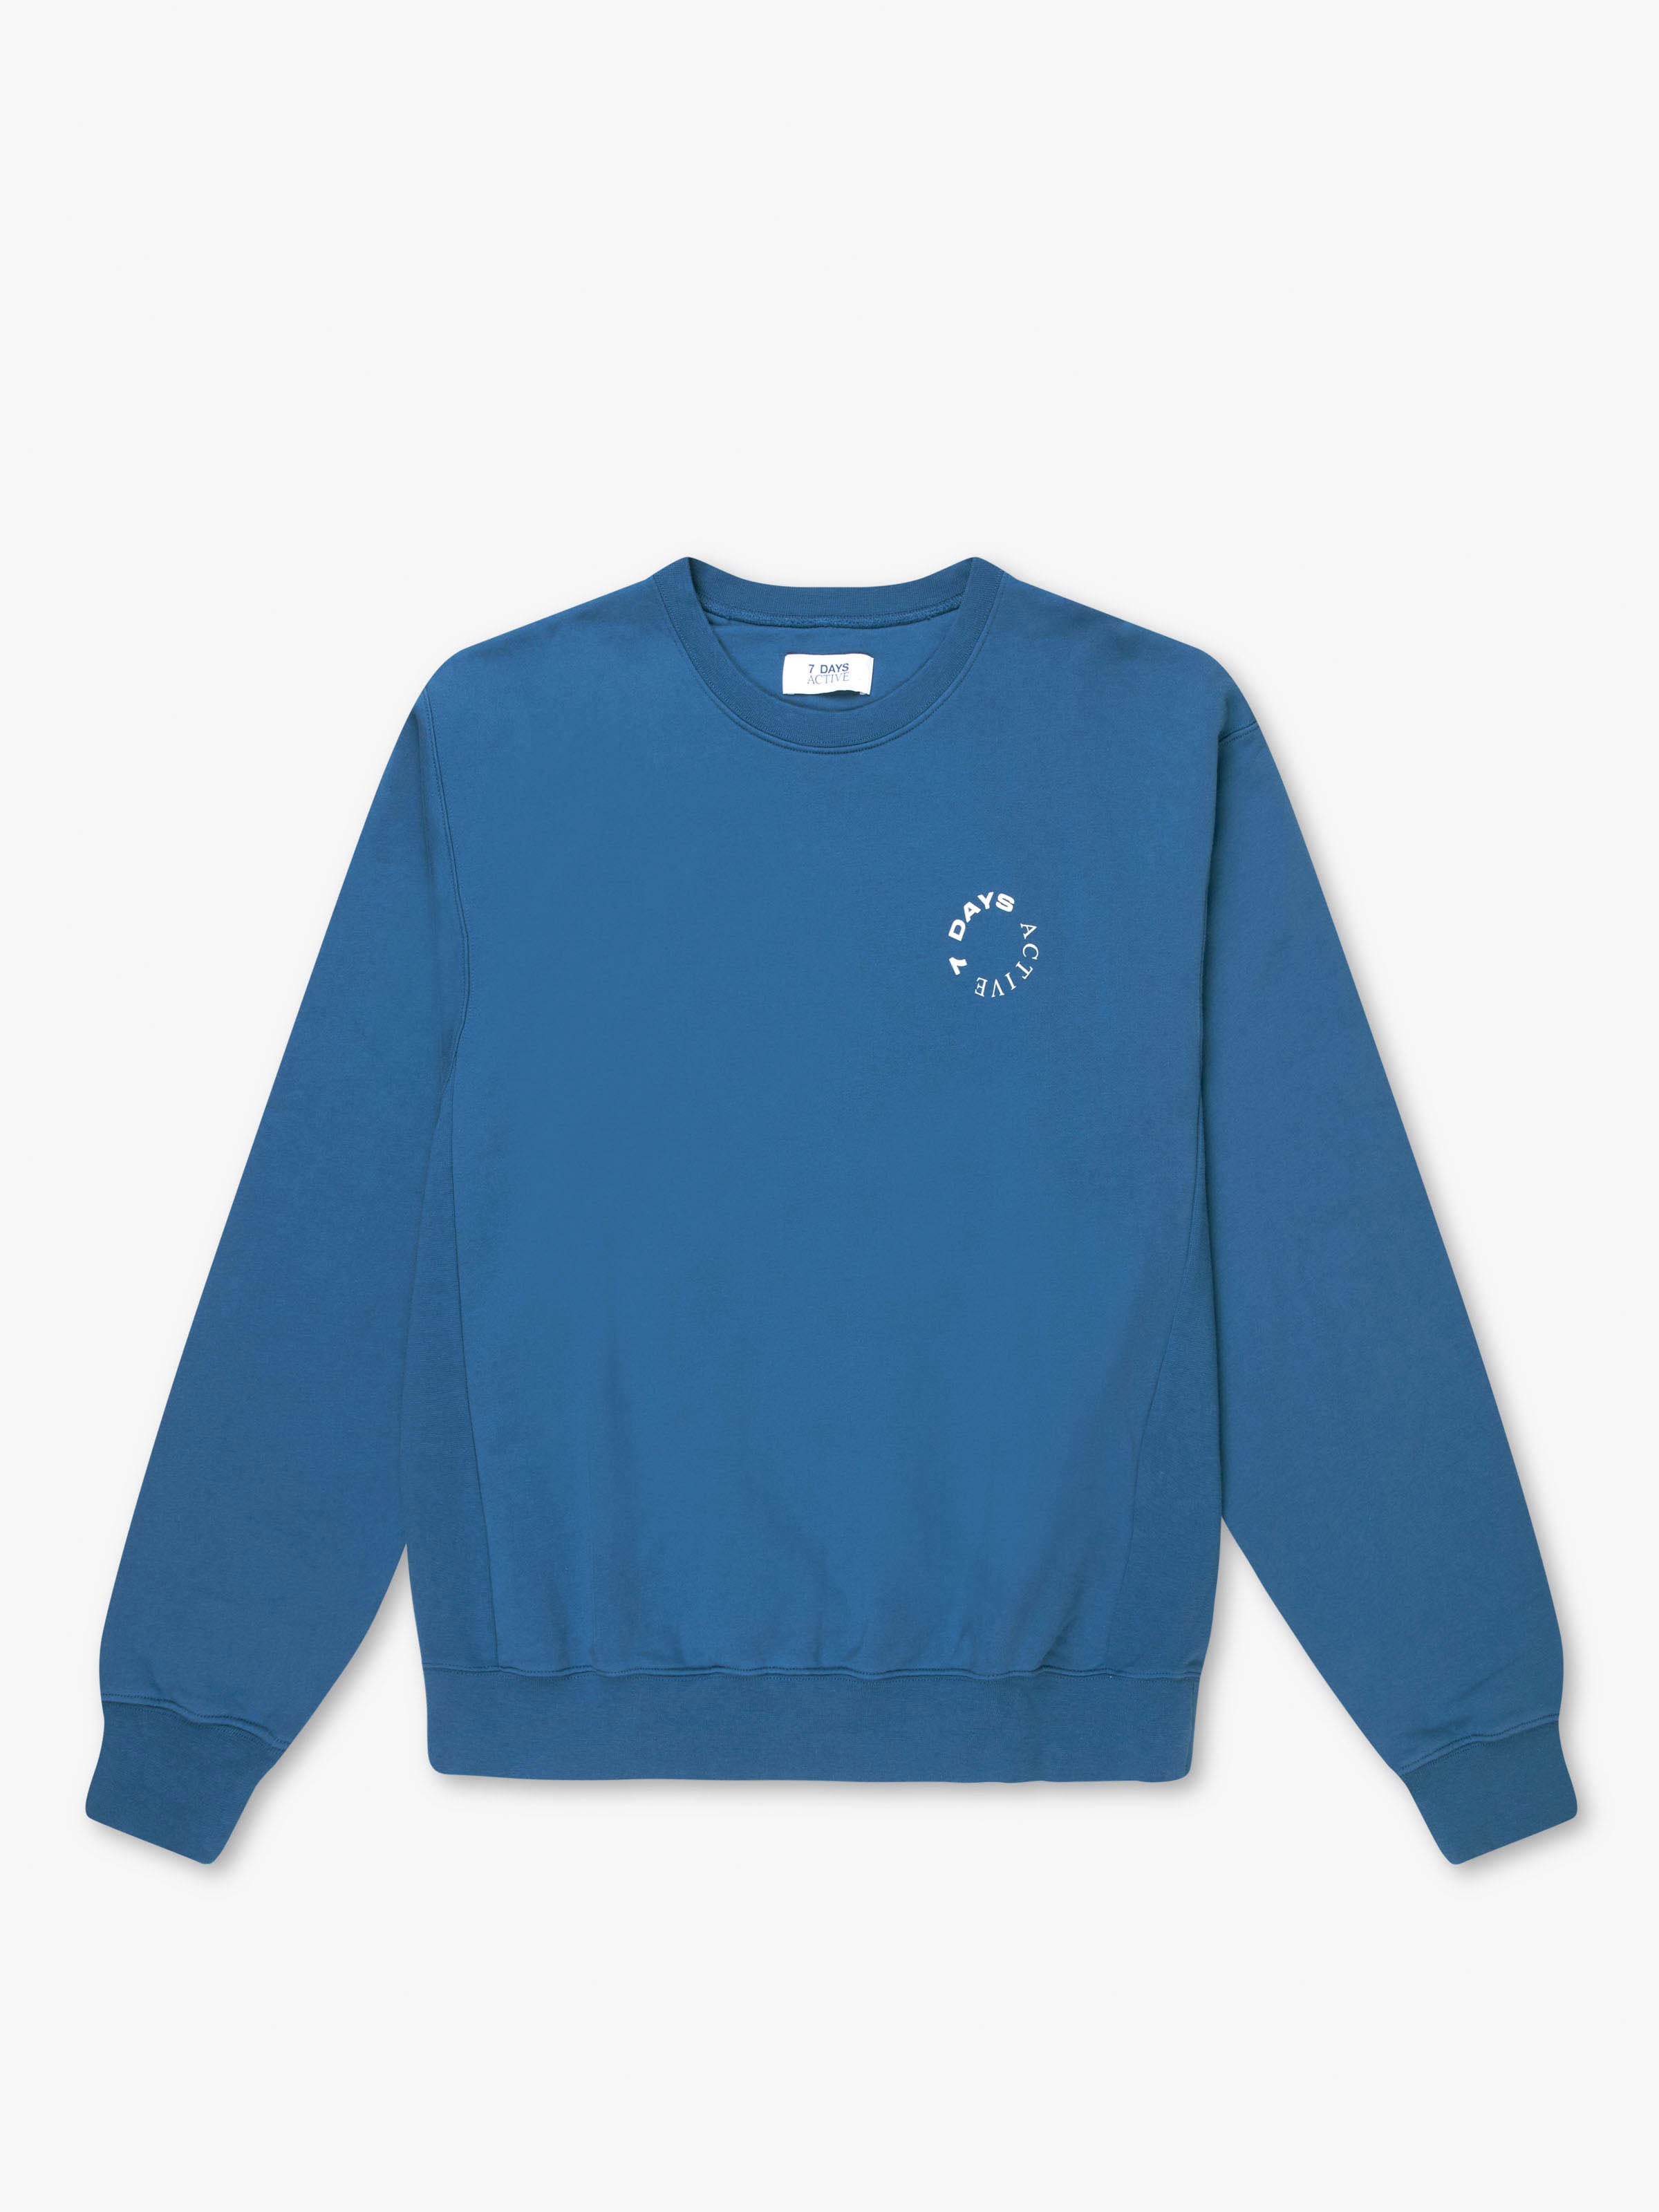 Good Day for It Comfort Wash Periwinkle Blue Crewneck Day Drinking  Sweatshirt Have a Good Day Self Care Attire Ultra Soft Lived in Crew 